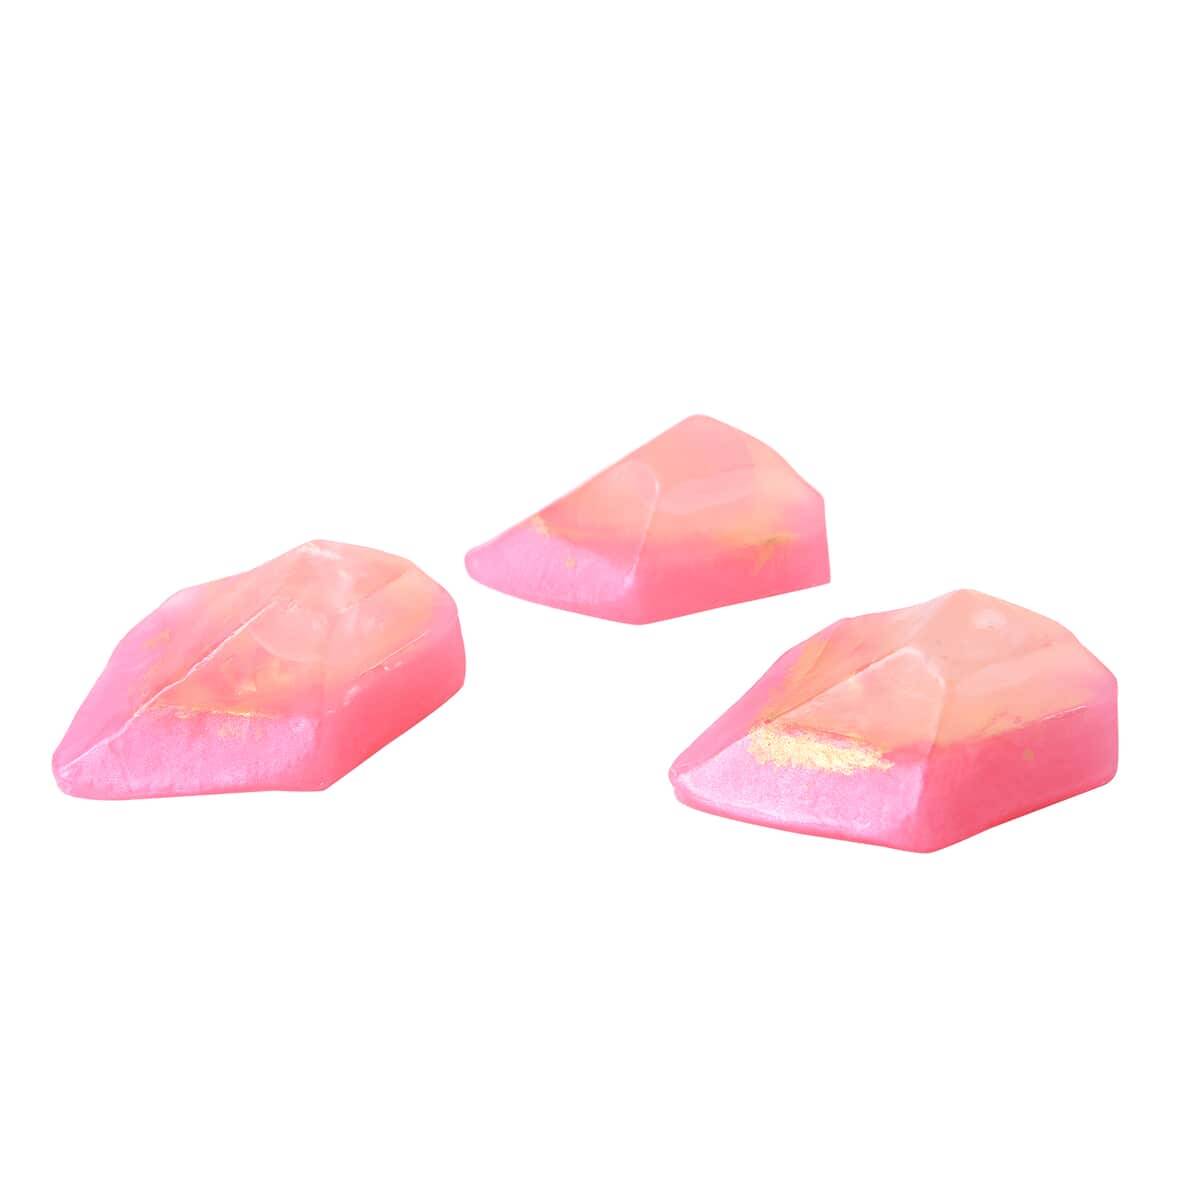 MARIGOLD & LOTUS 3pc Set Rose Quartz Soap Rock with Crystal Infused and Strawberry Fragrance image number 5